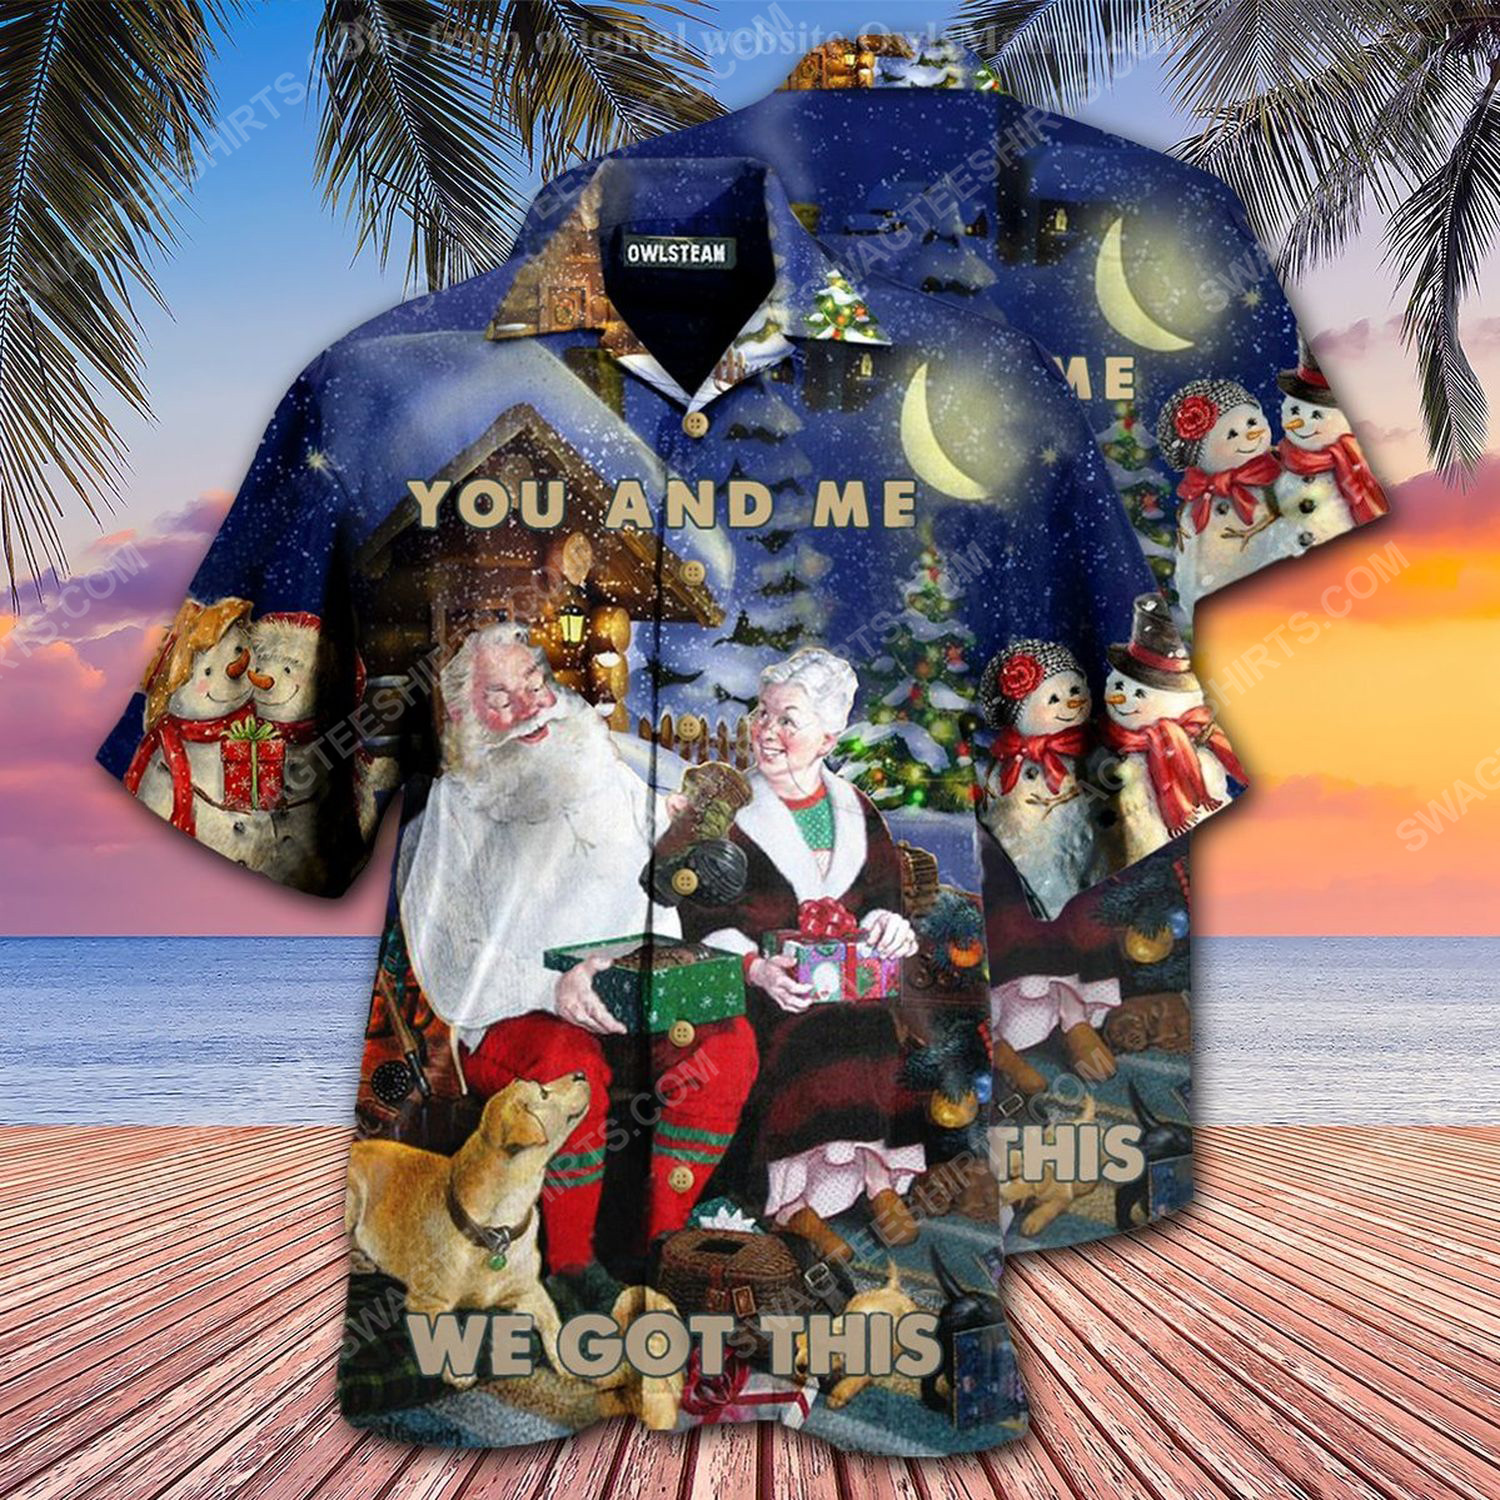 [special edition] Christmas holiday you and me we got this hawaiian shirt – maria